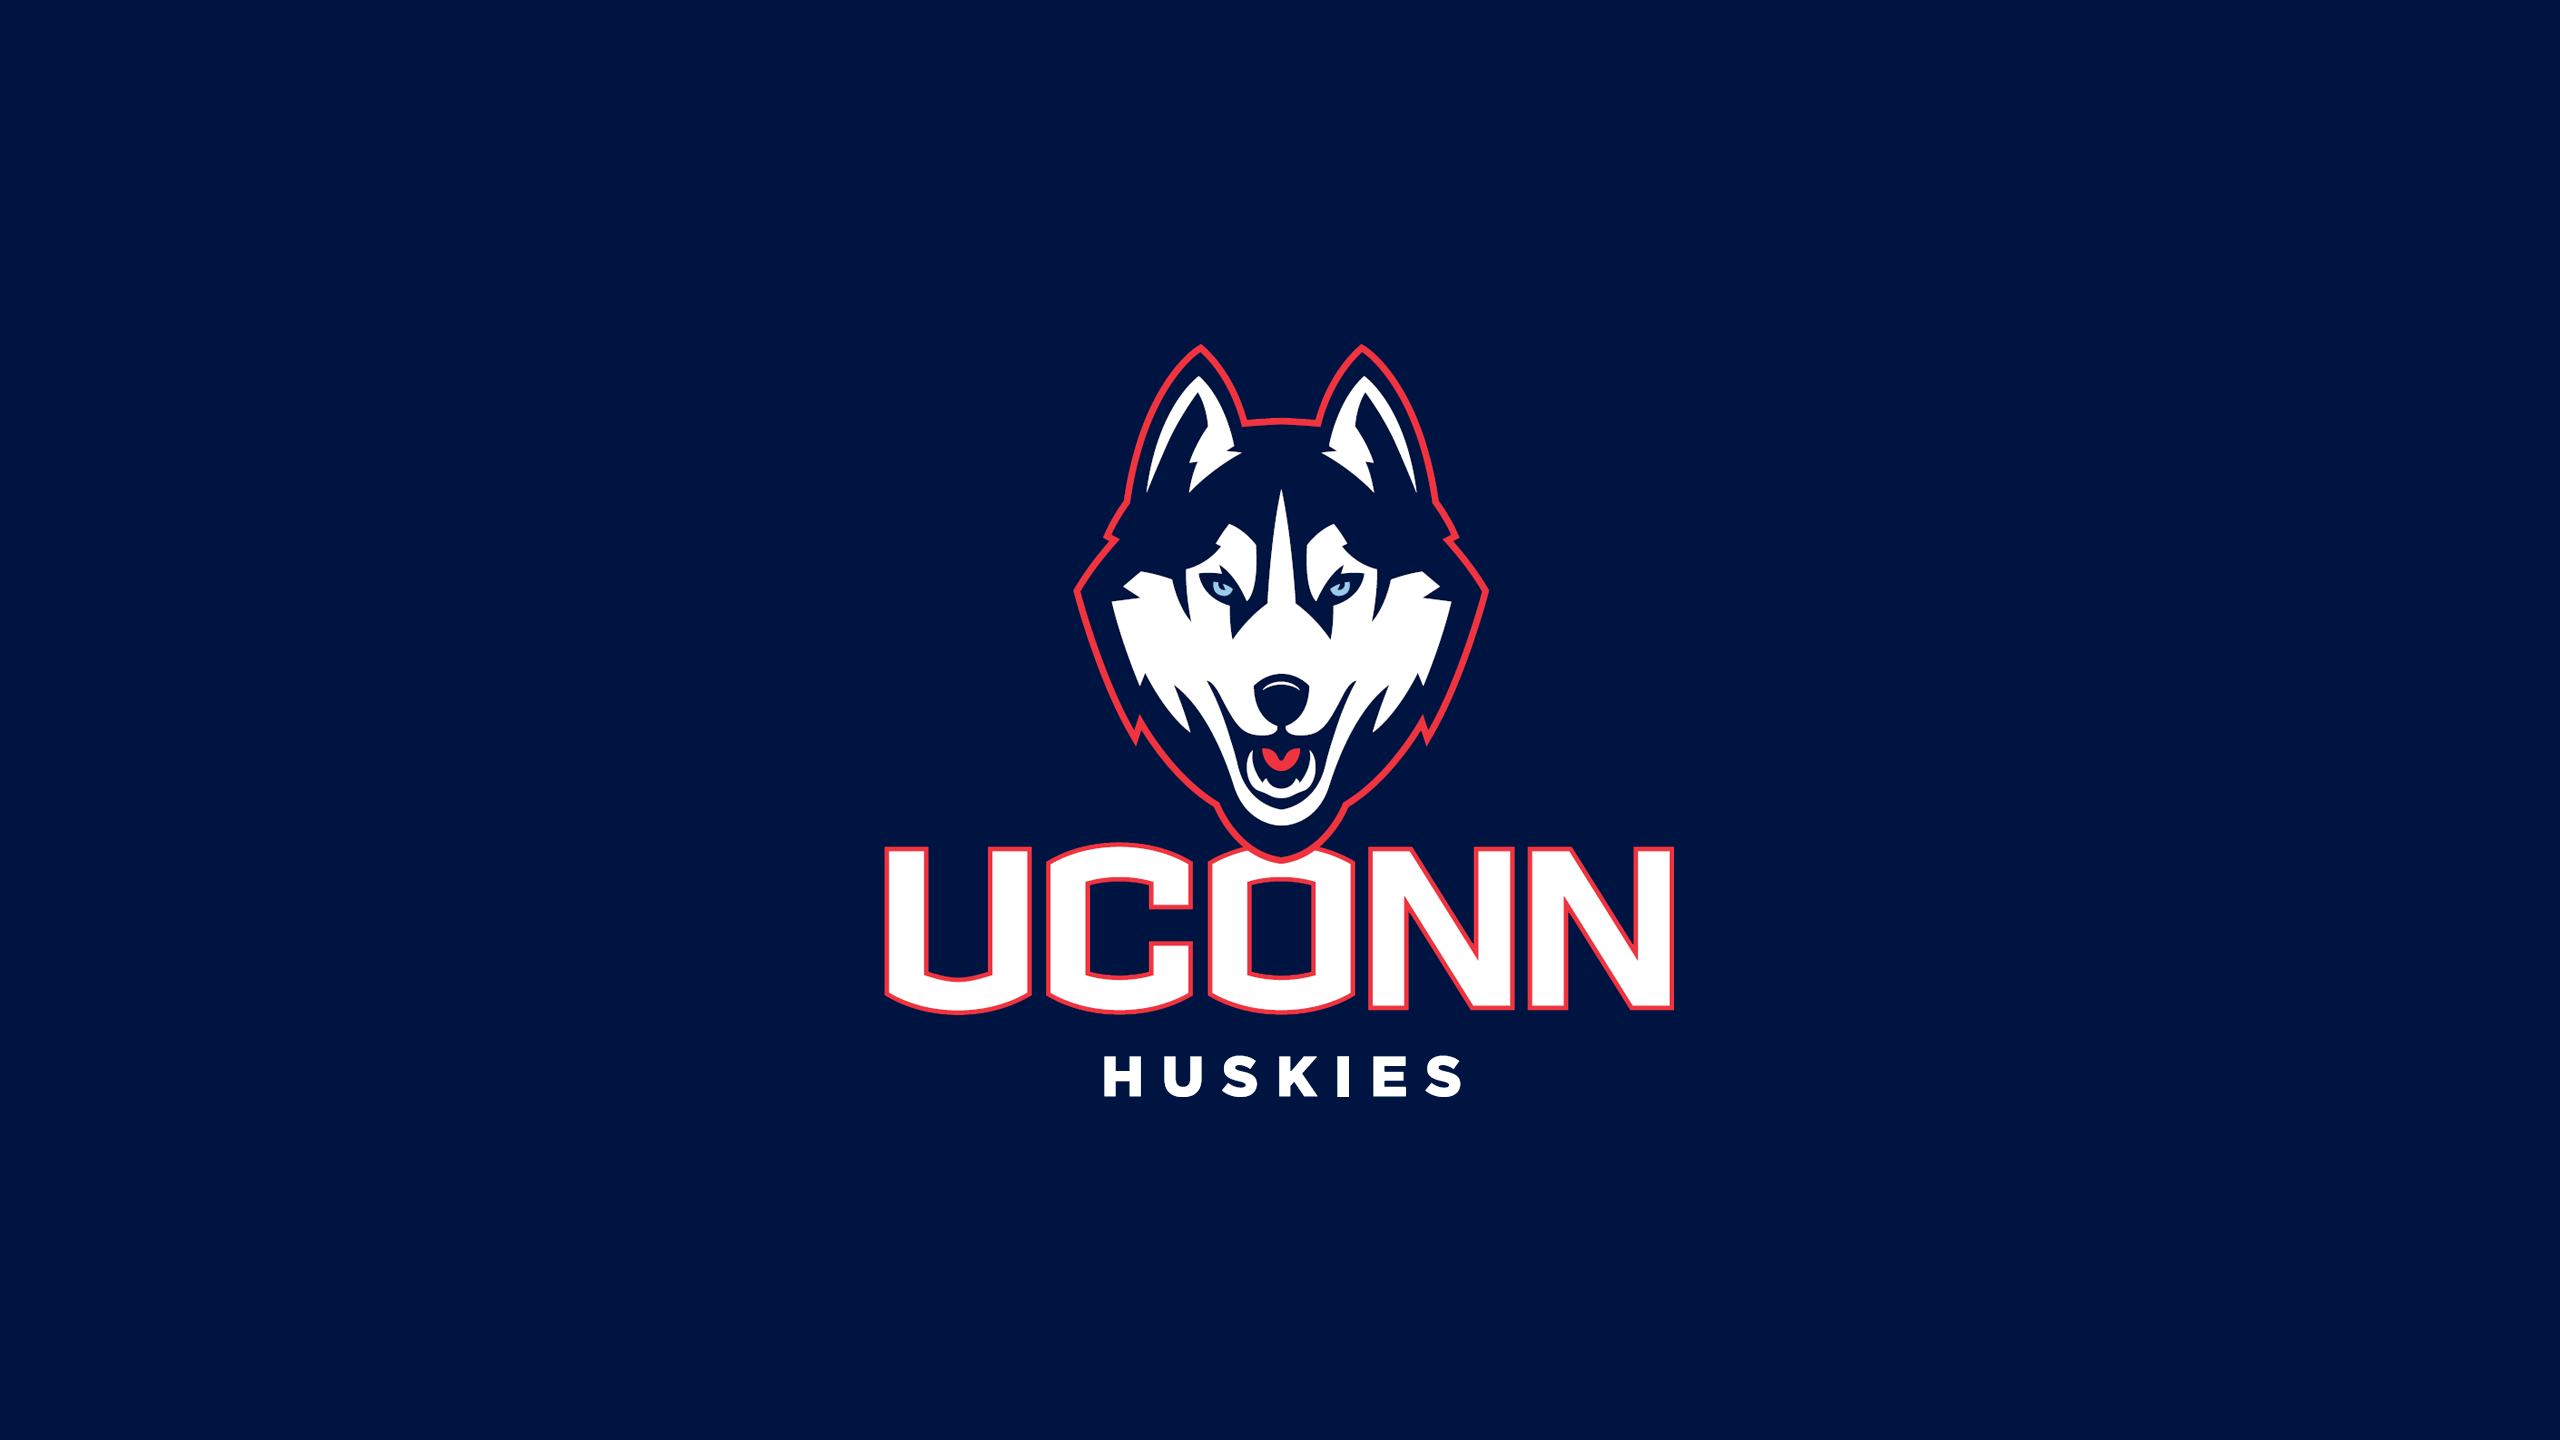 Connecticut Huskies Basketball - NCAAB - Square Bettor